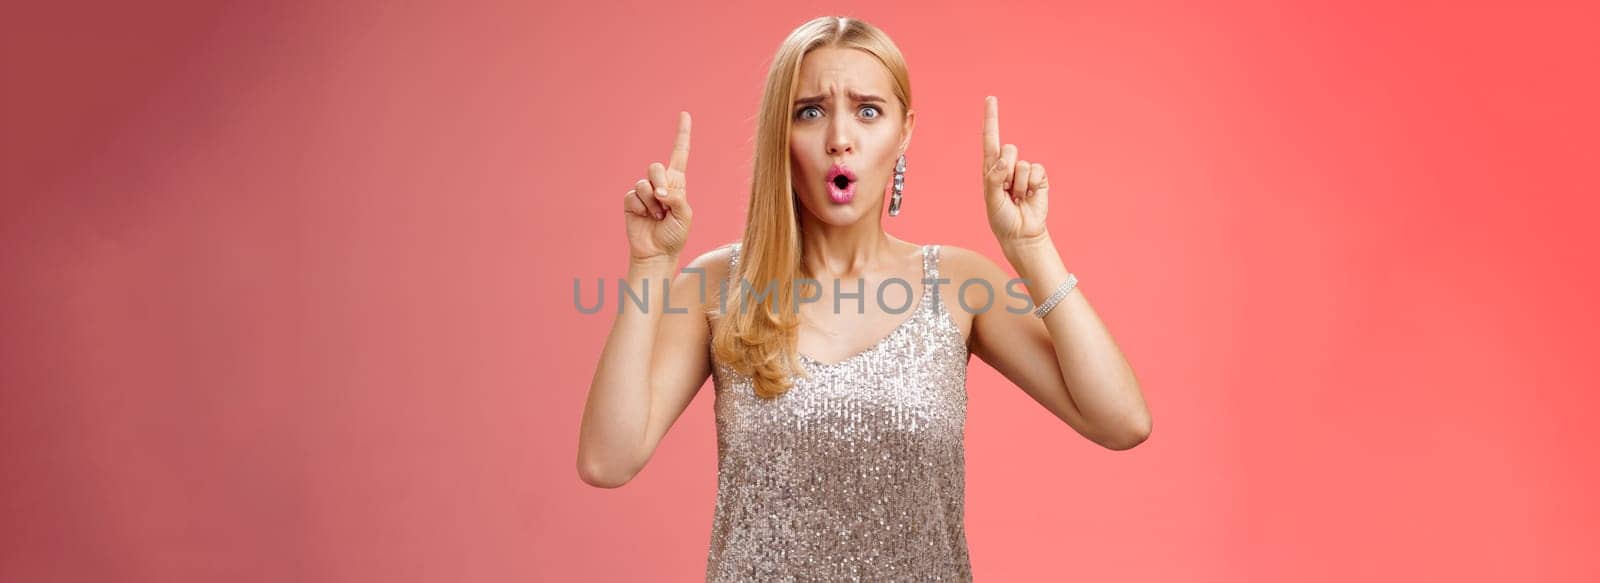 Upset gloomy complaining blond whining girl in silver stylish luxurious dress frowning cringing unhappy pointing up regret jealous tell boyfriend sale over, standing depressed sad red background.